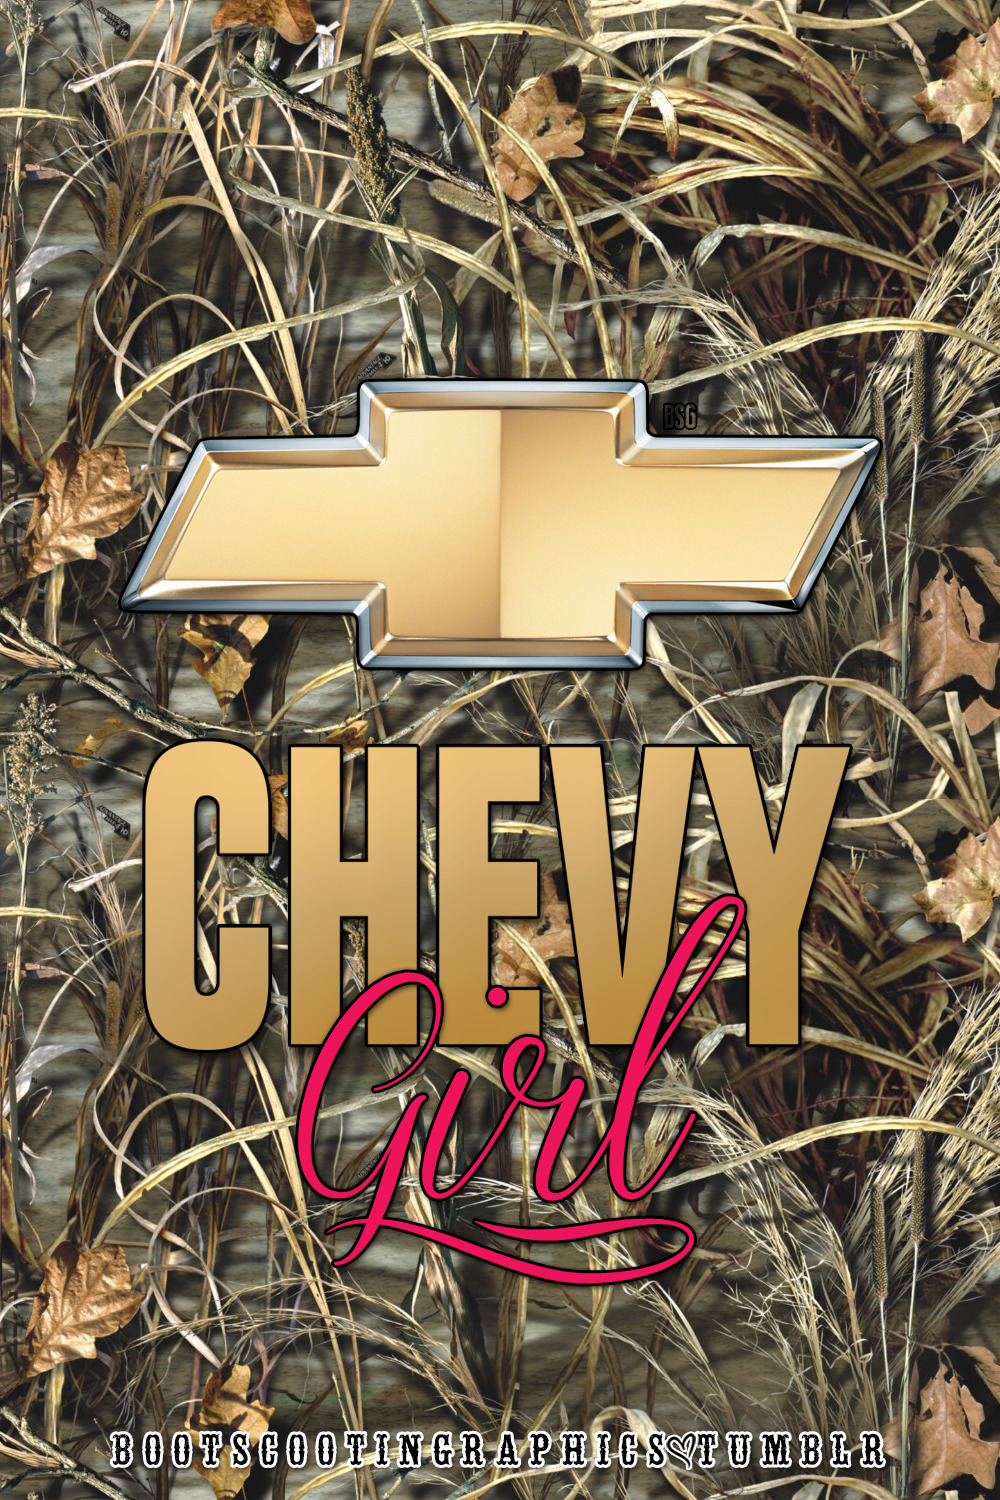 Country Girl Chevy